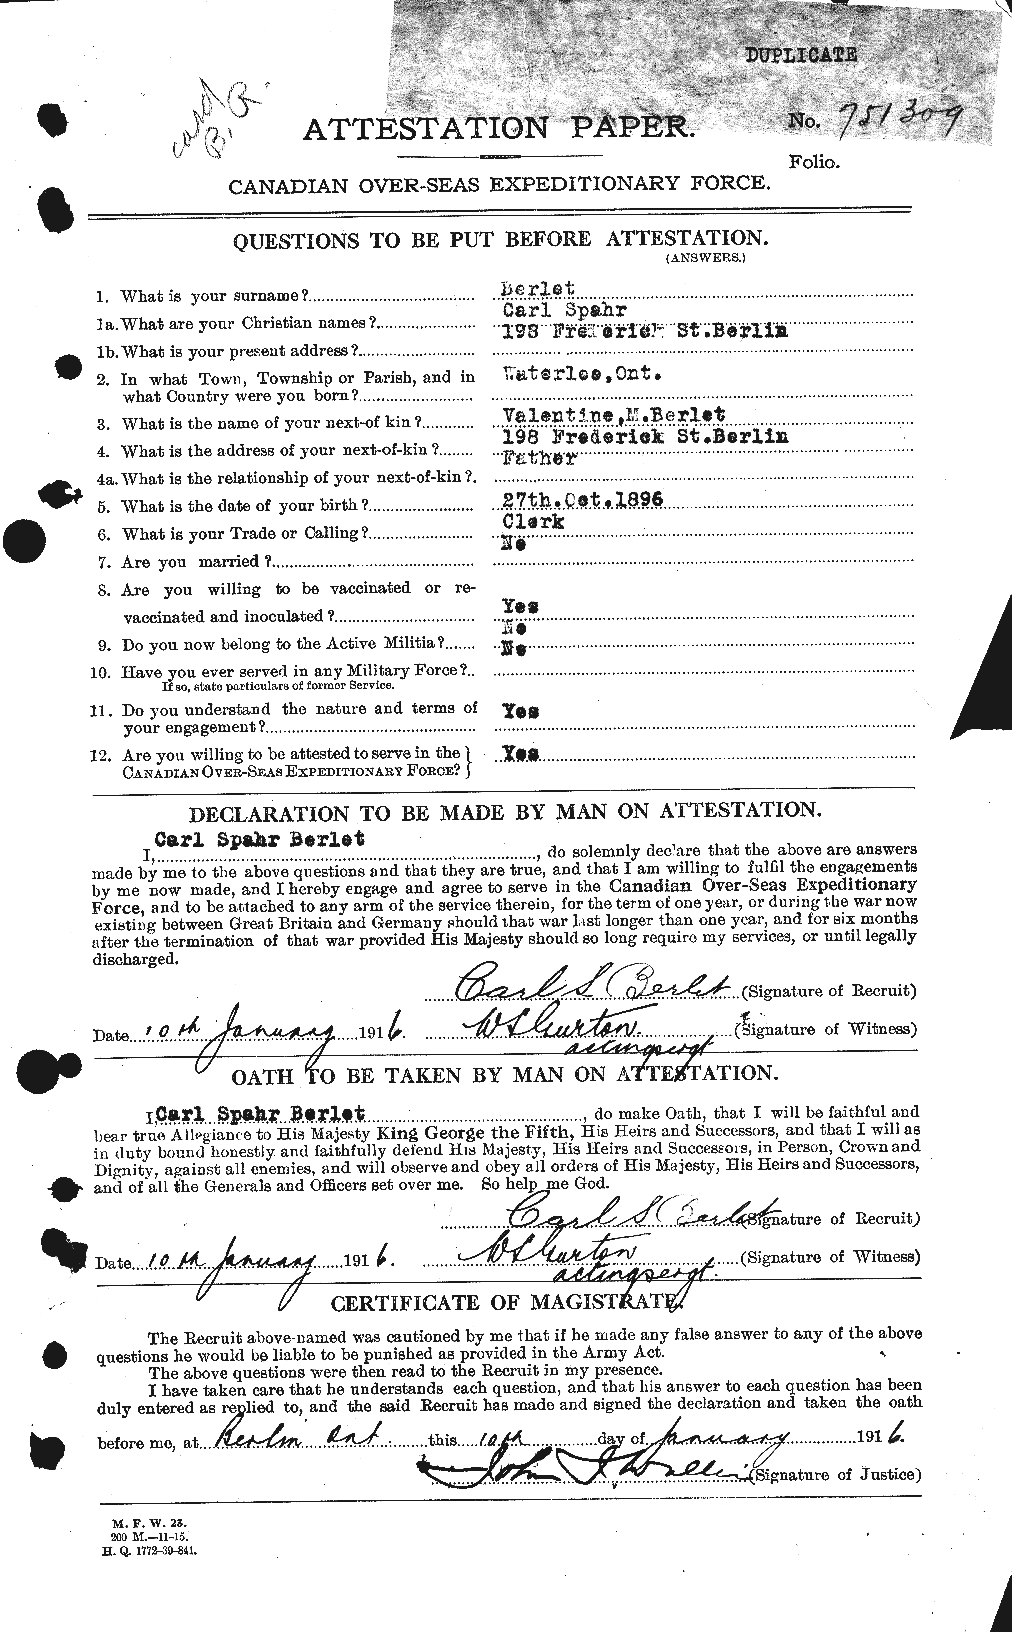 Personnel Records of the First World War - CEF 241867a